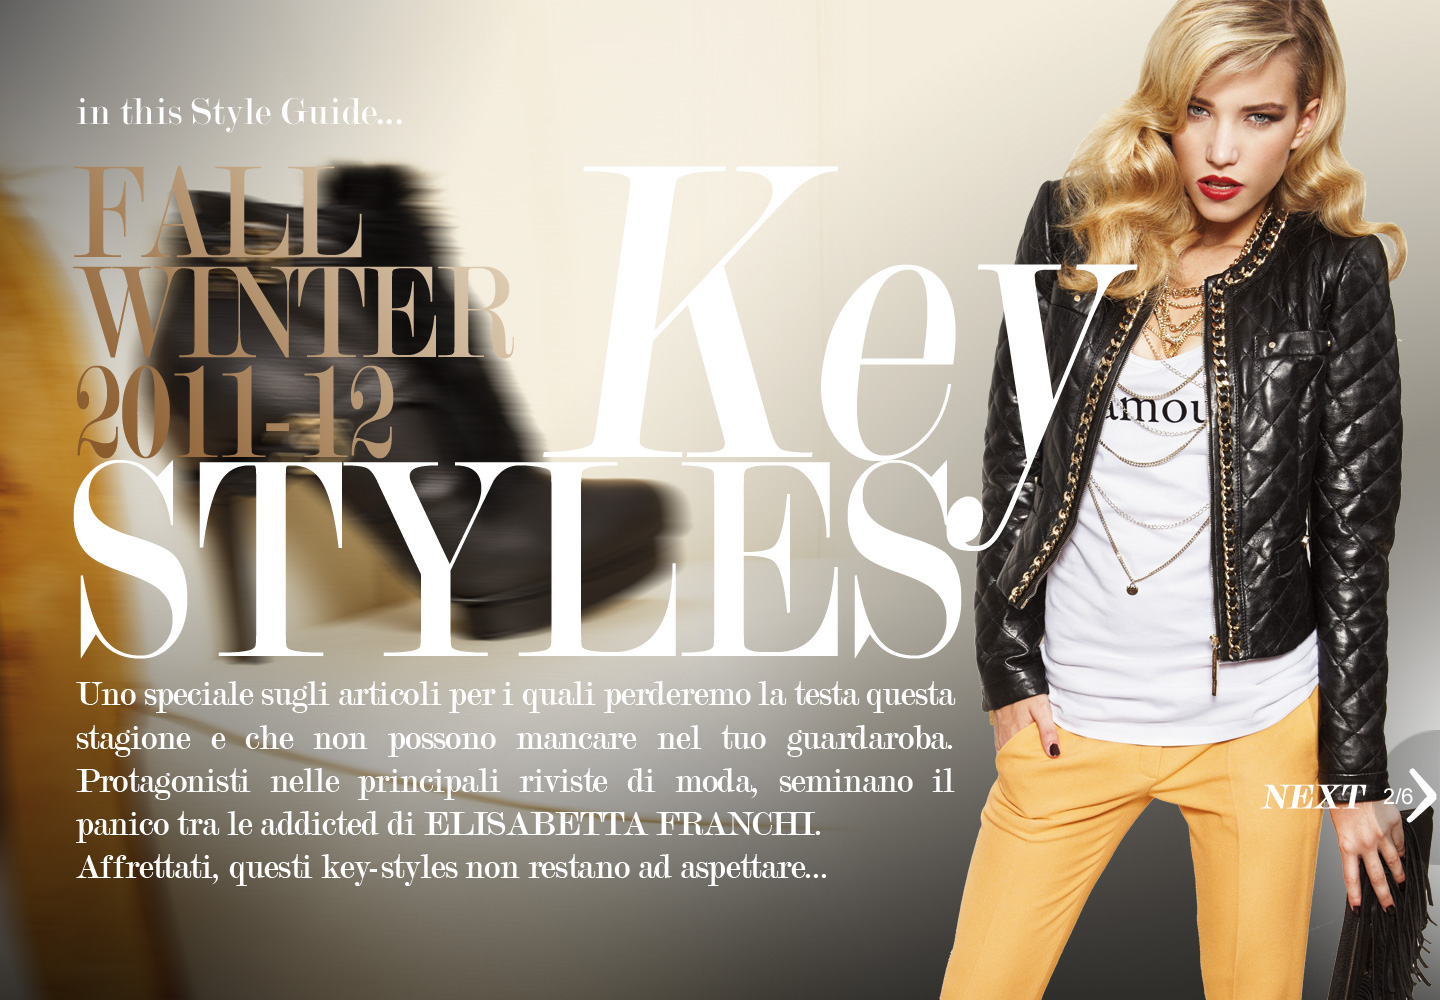 Style guide: Key Styles